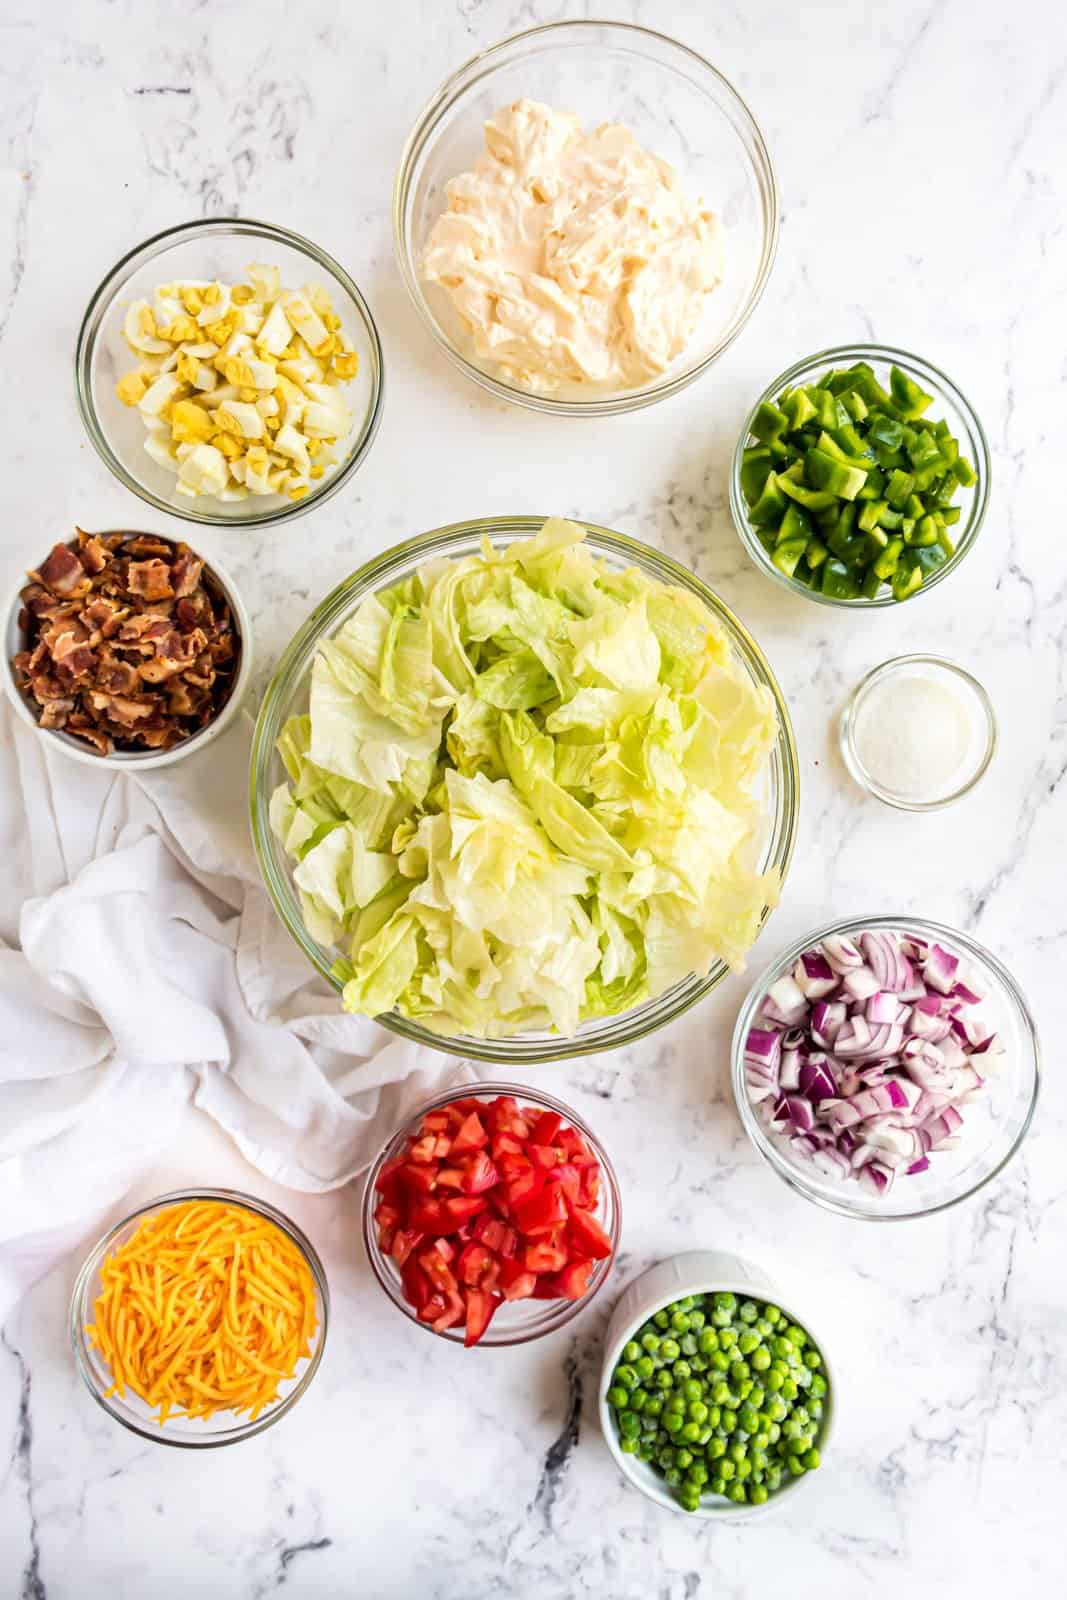 Ingredients needed: head iceberg lettuce, red onion, green pepper, hard-boiled eggs, roma tomatoes, frozen peas, shredded cheddar cheese, bacon, mayonnaise and granulated sugar.